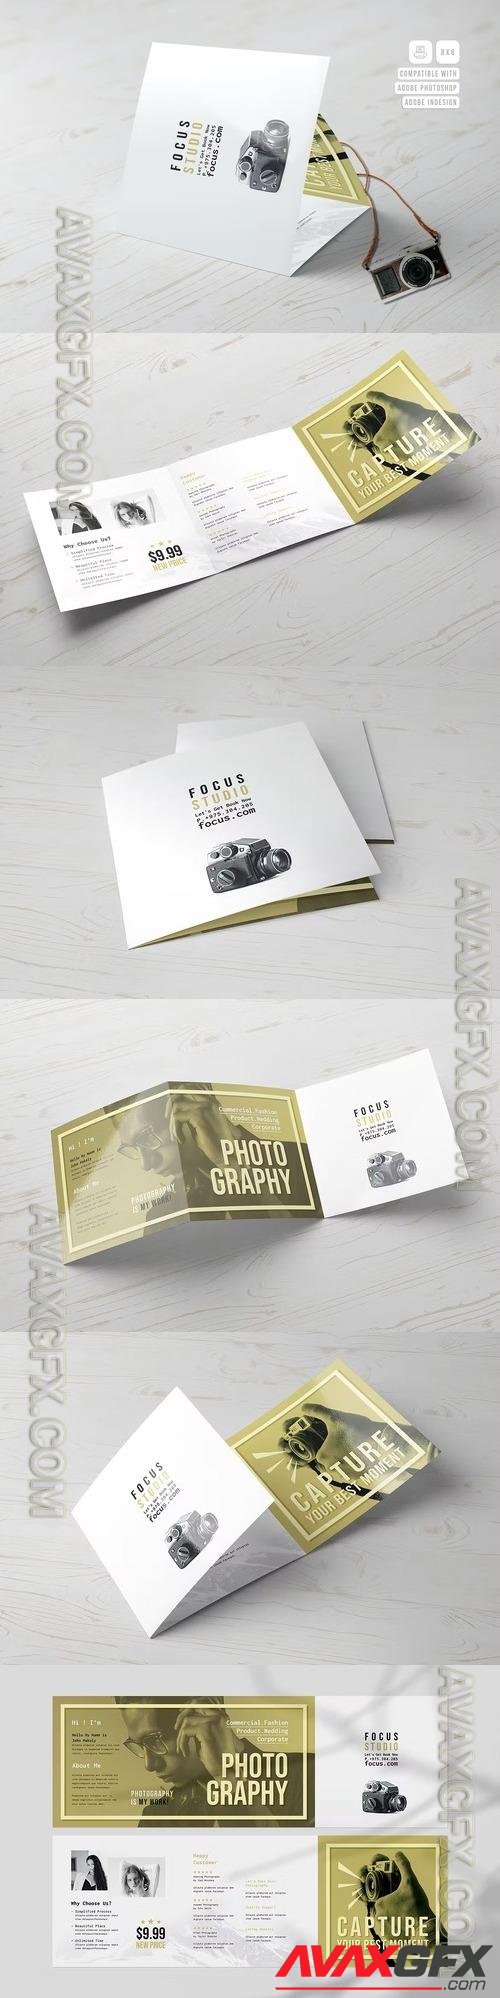 Photography Square Trifold Brochure 9J7SP9P